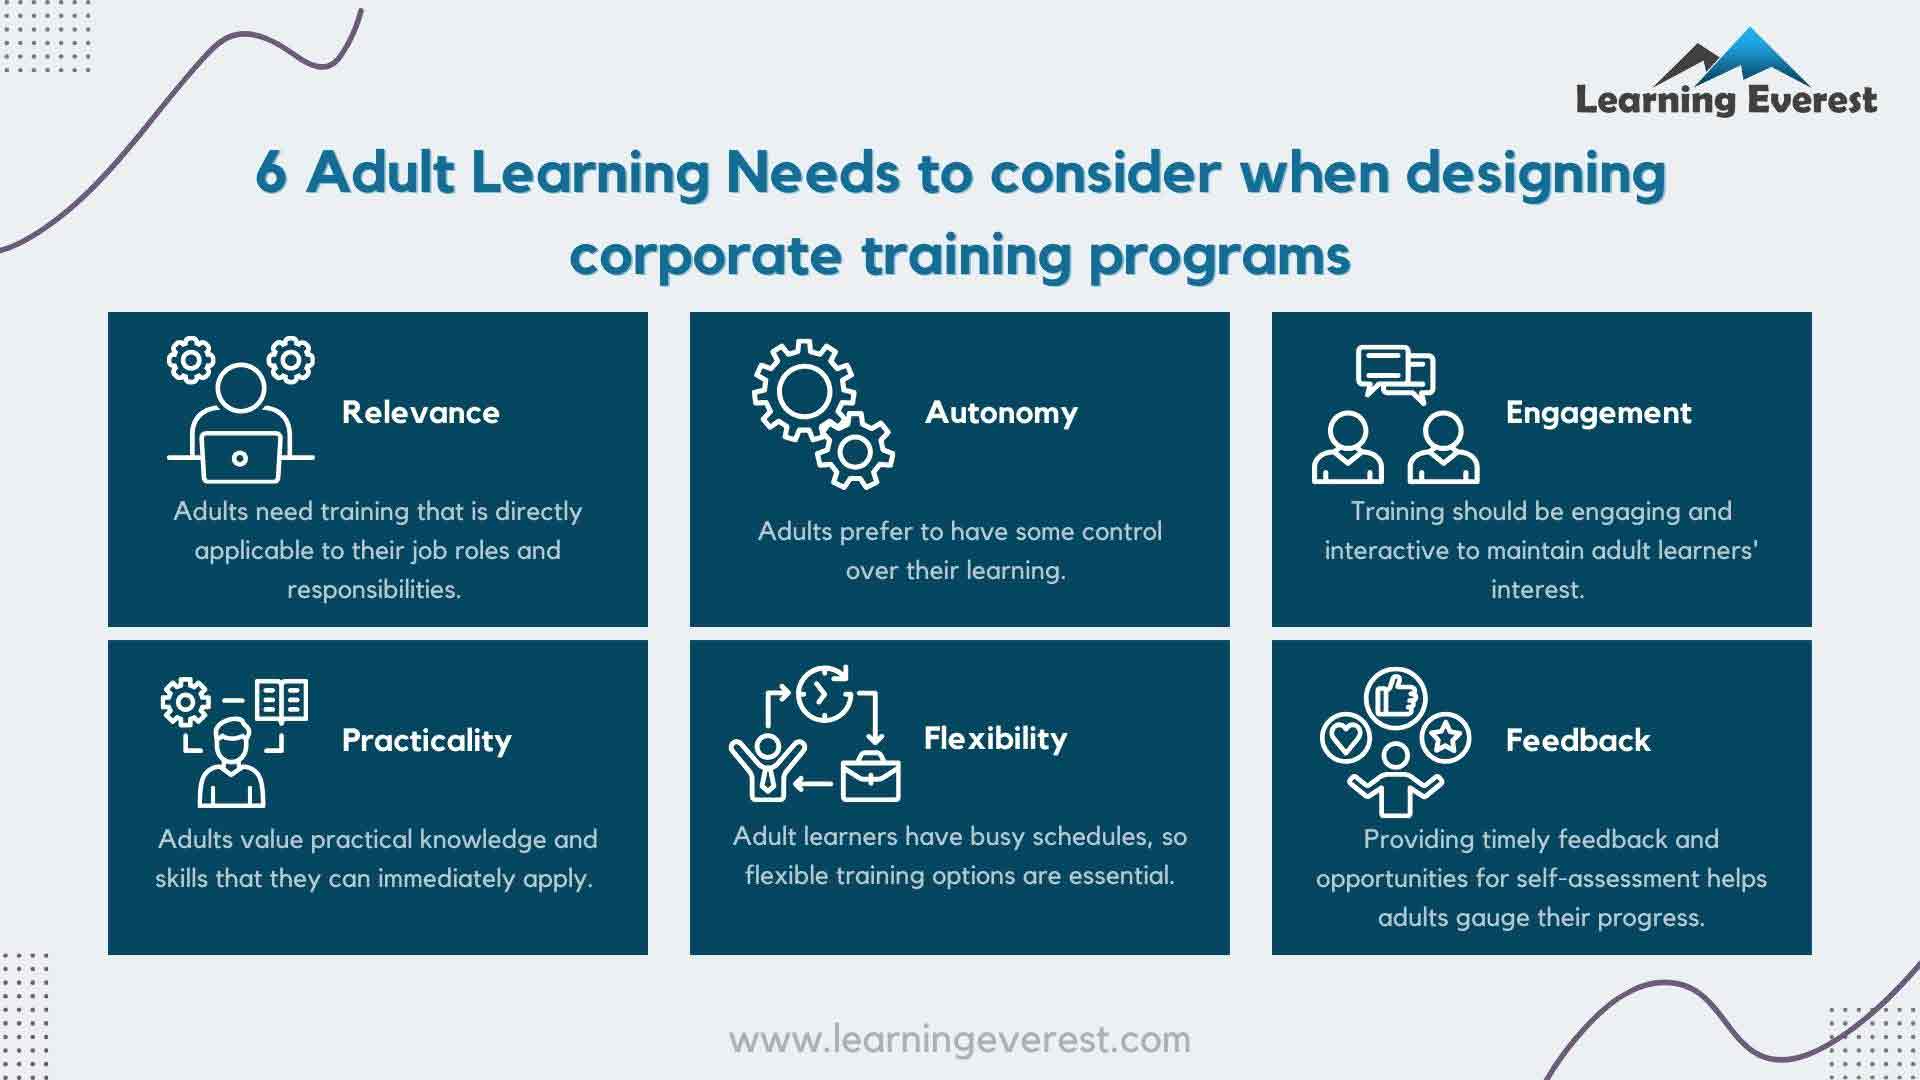 6 Adult Learning Needs to consider when designing corporate training programs